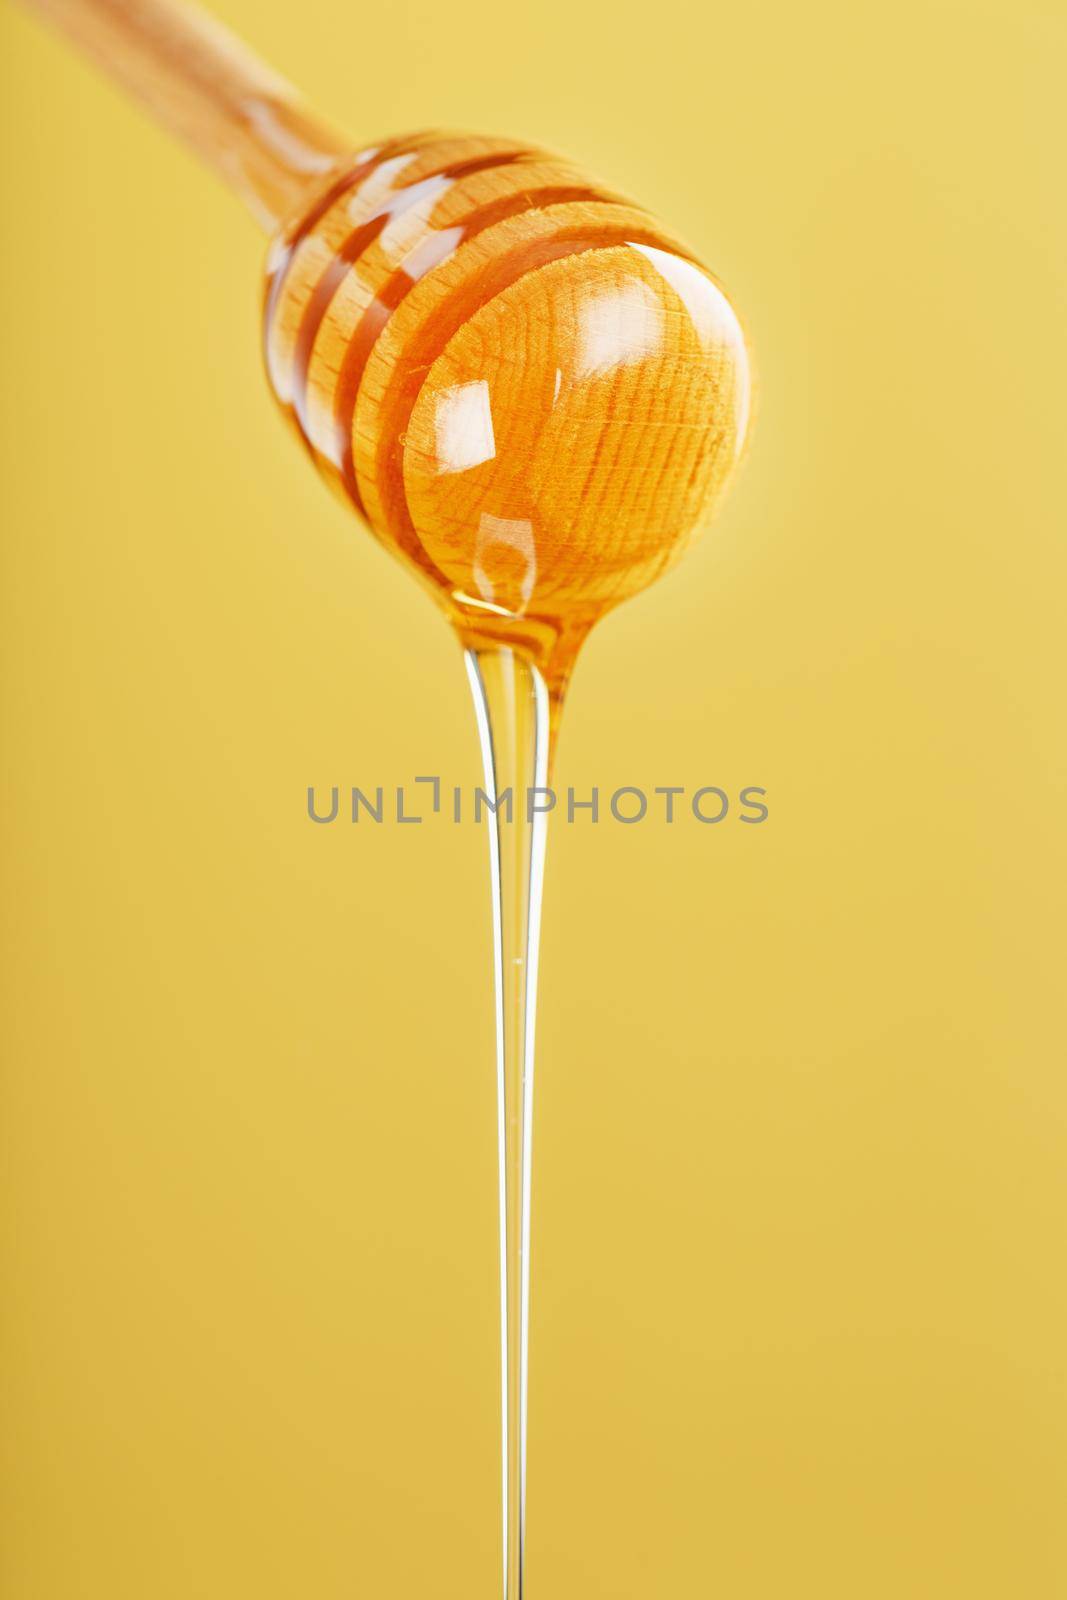 Golden honey trickles from a wooden honey dipper on a yellow background. Healthy food diet concept, ecologically pure product